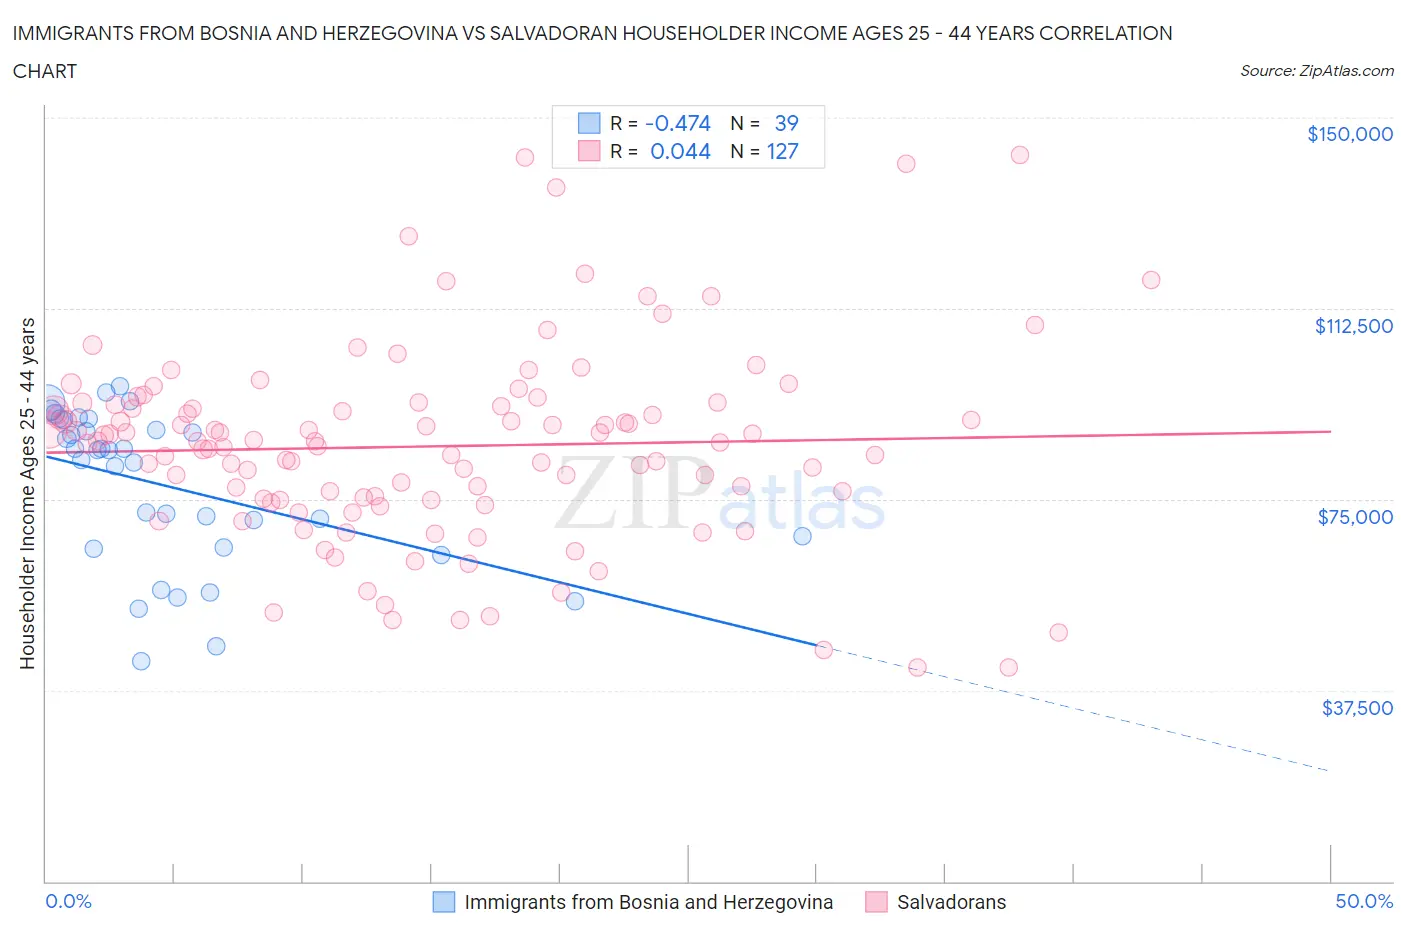 Immigrants from Bosnia and Herzegovina vs Salvadoran Householder Income Ages 25 - 44 years